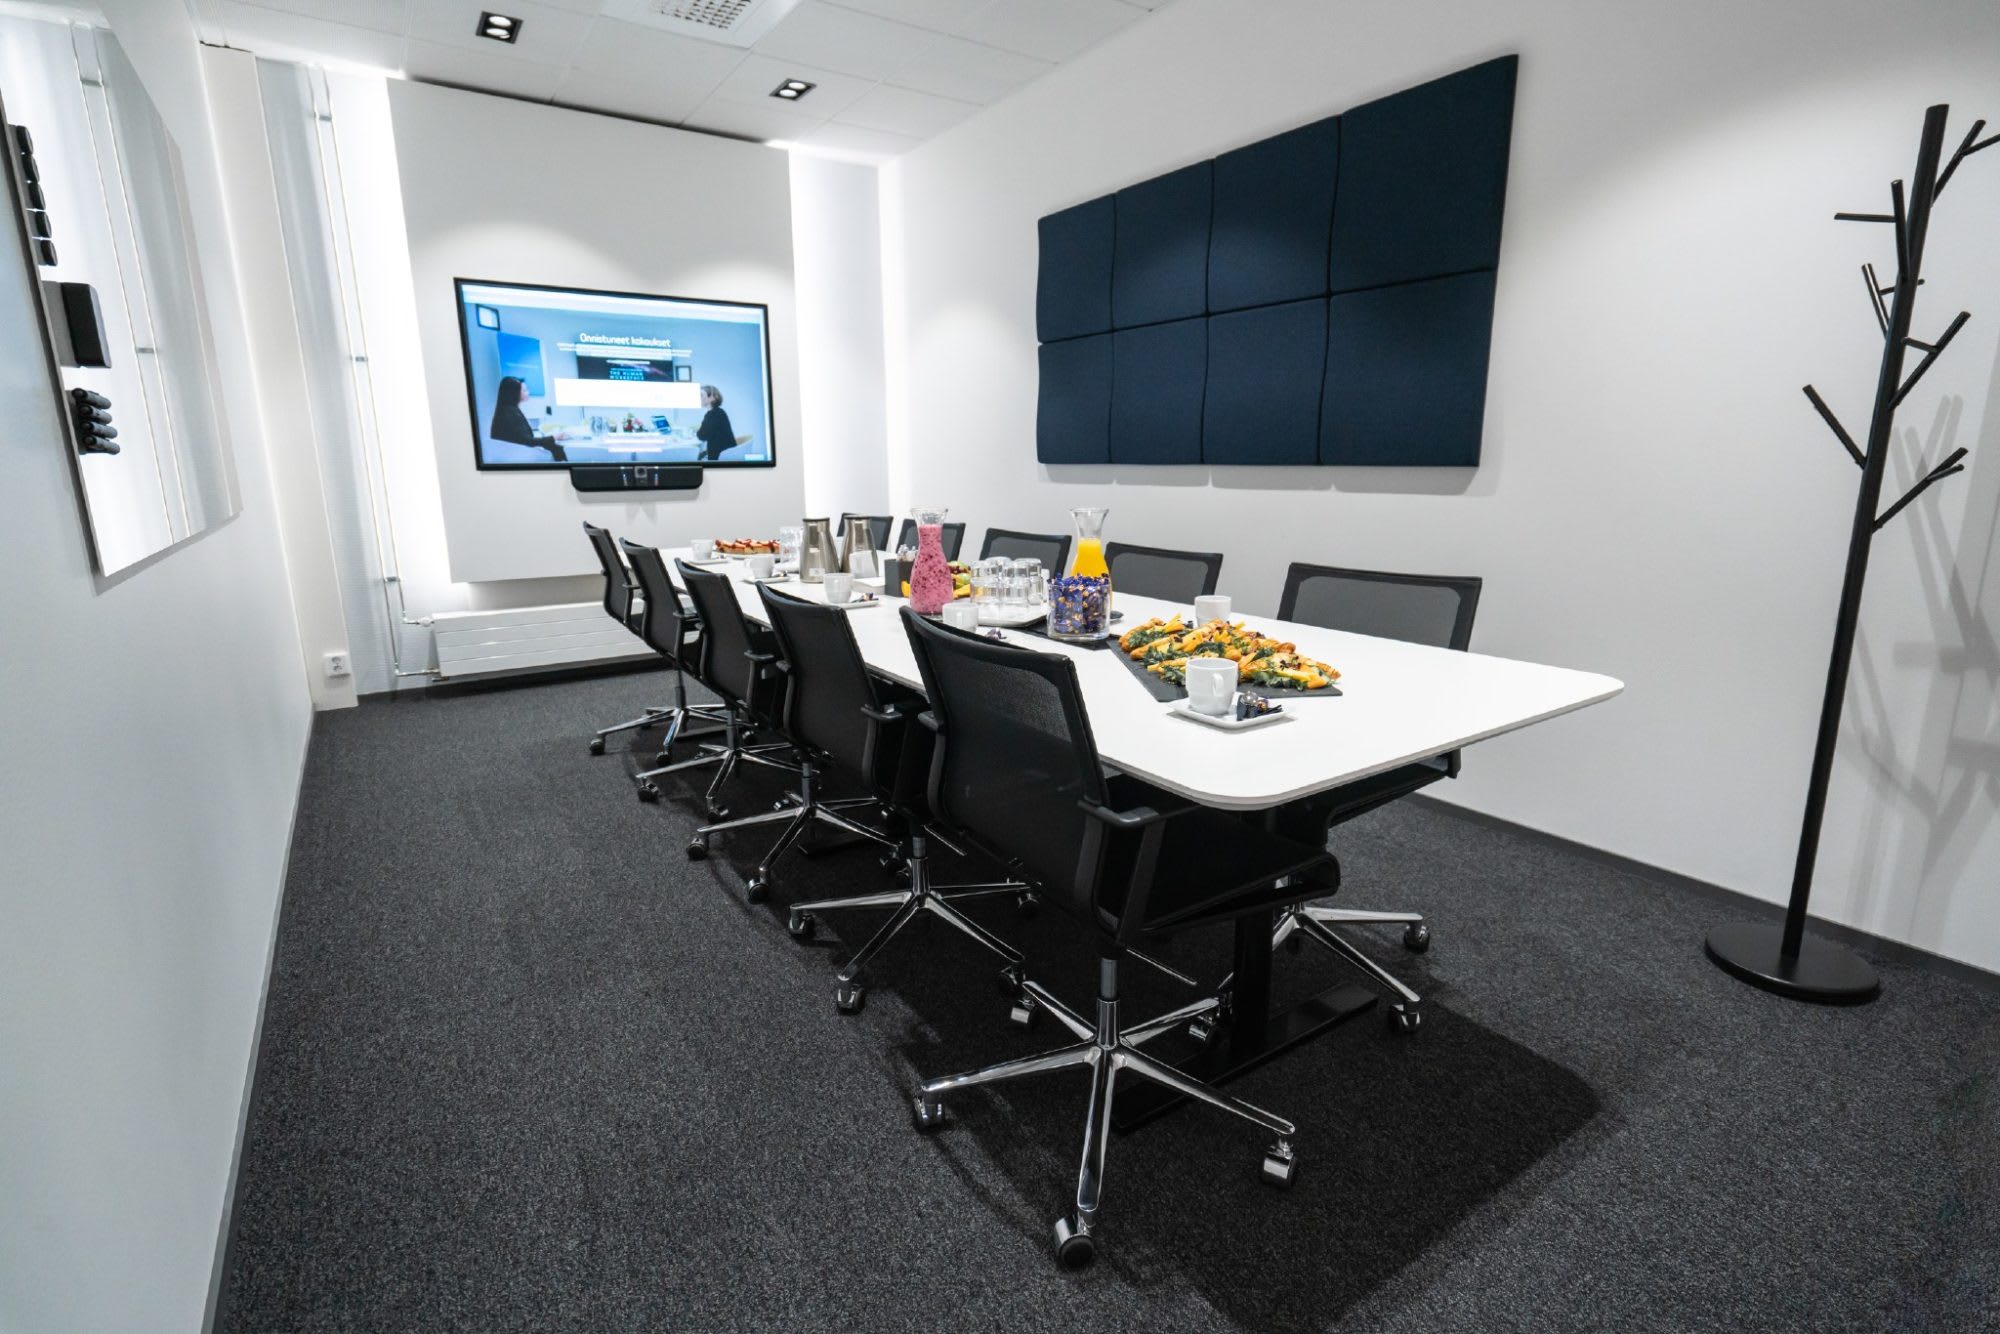 Meeting room for 6 located close to the Helsinki-Vantaa airport, which has great international connections. The room is finished to high specifications and it includes an AV-screen, whiteboard and high speed Wi-FI and office equipment.